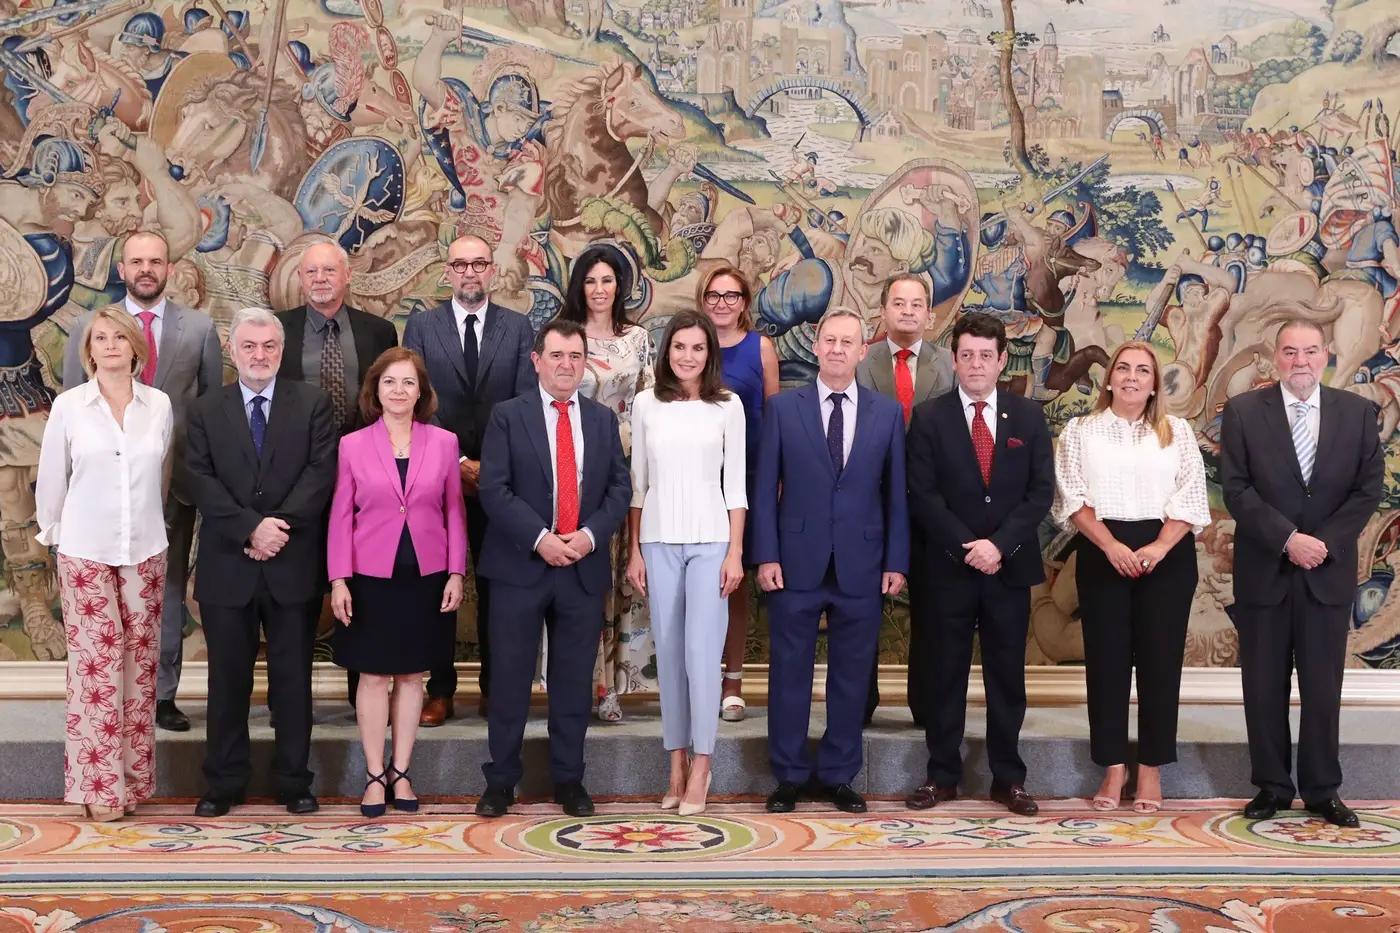 Queen Letizia received audience at palace wearing white top and blue trouser from hugoboss